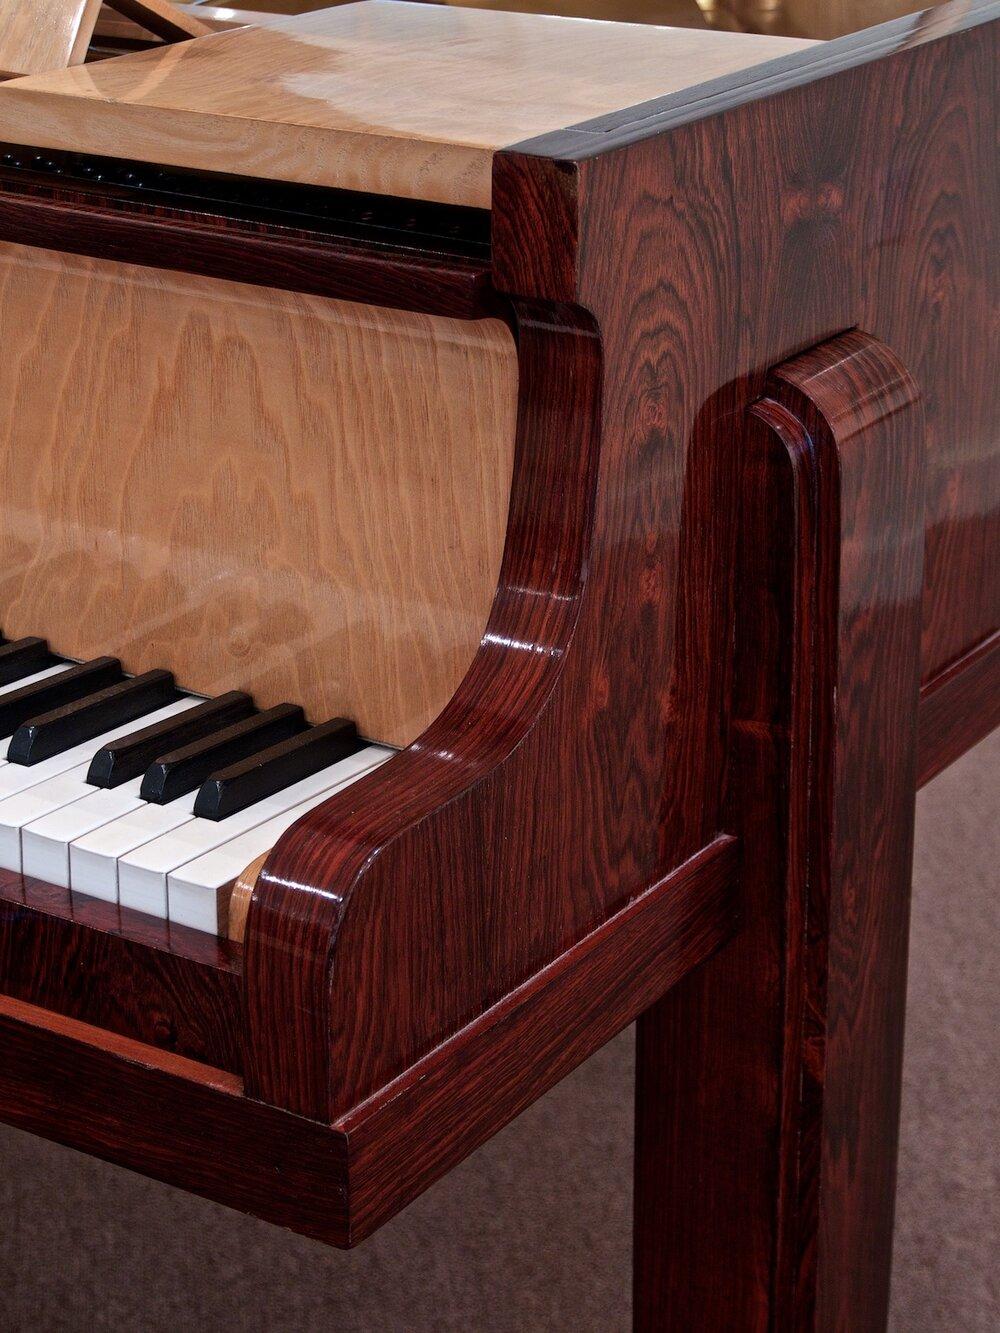 Pierre-Paul Montagnac Modernist Piano In Excellent Condition For Sale In Philadelphia, PA